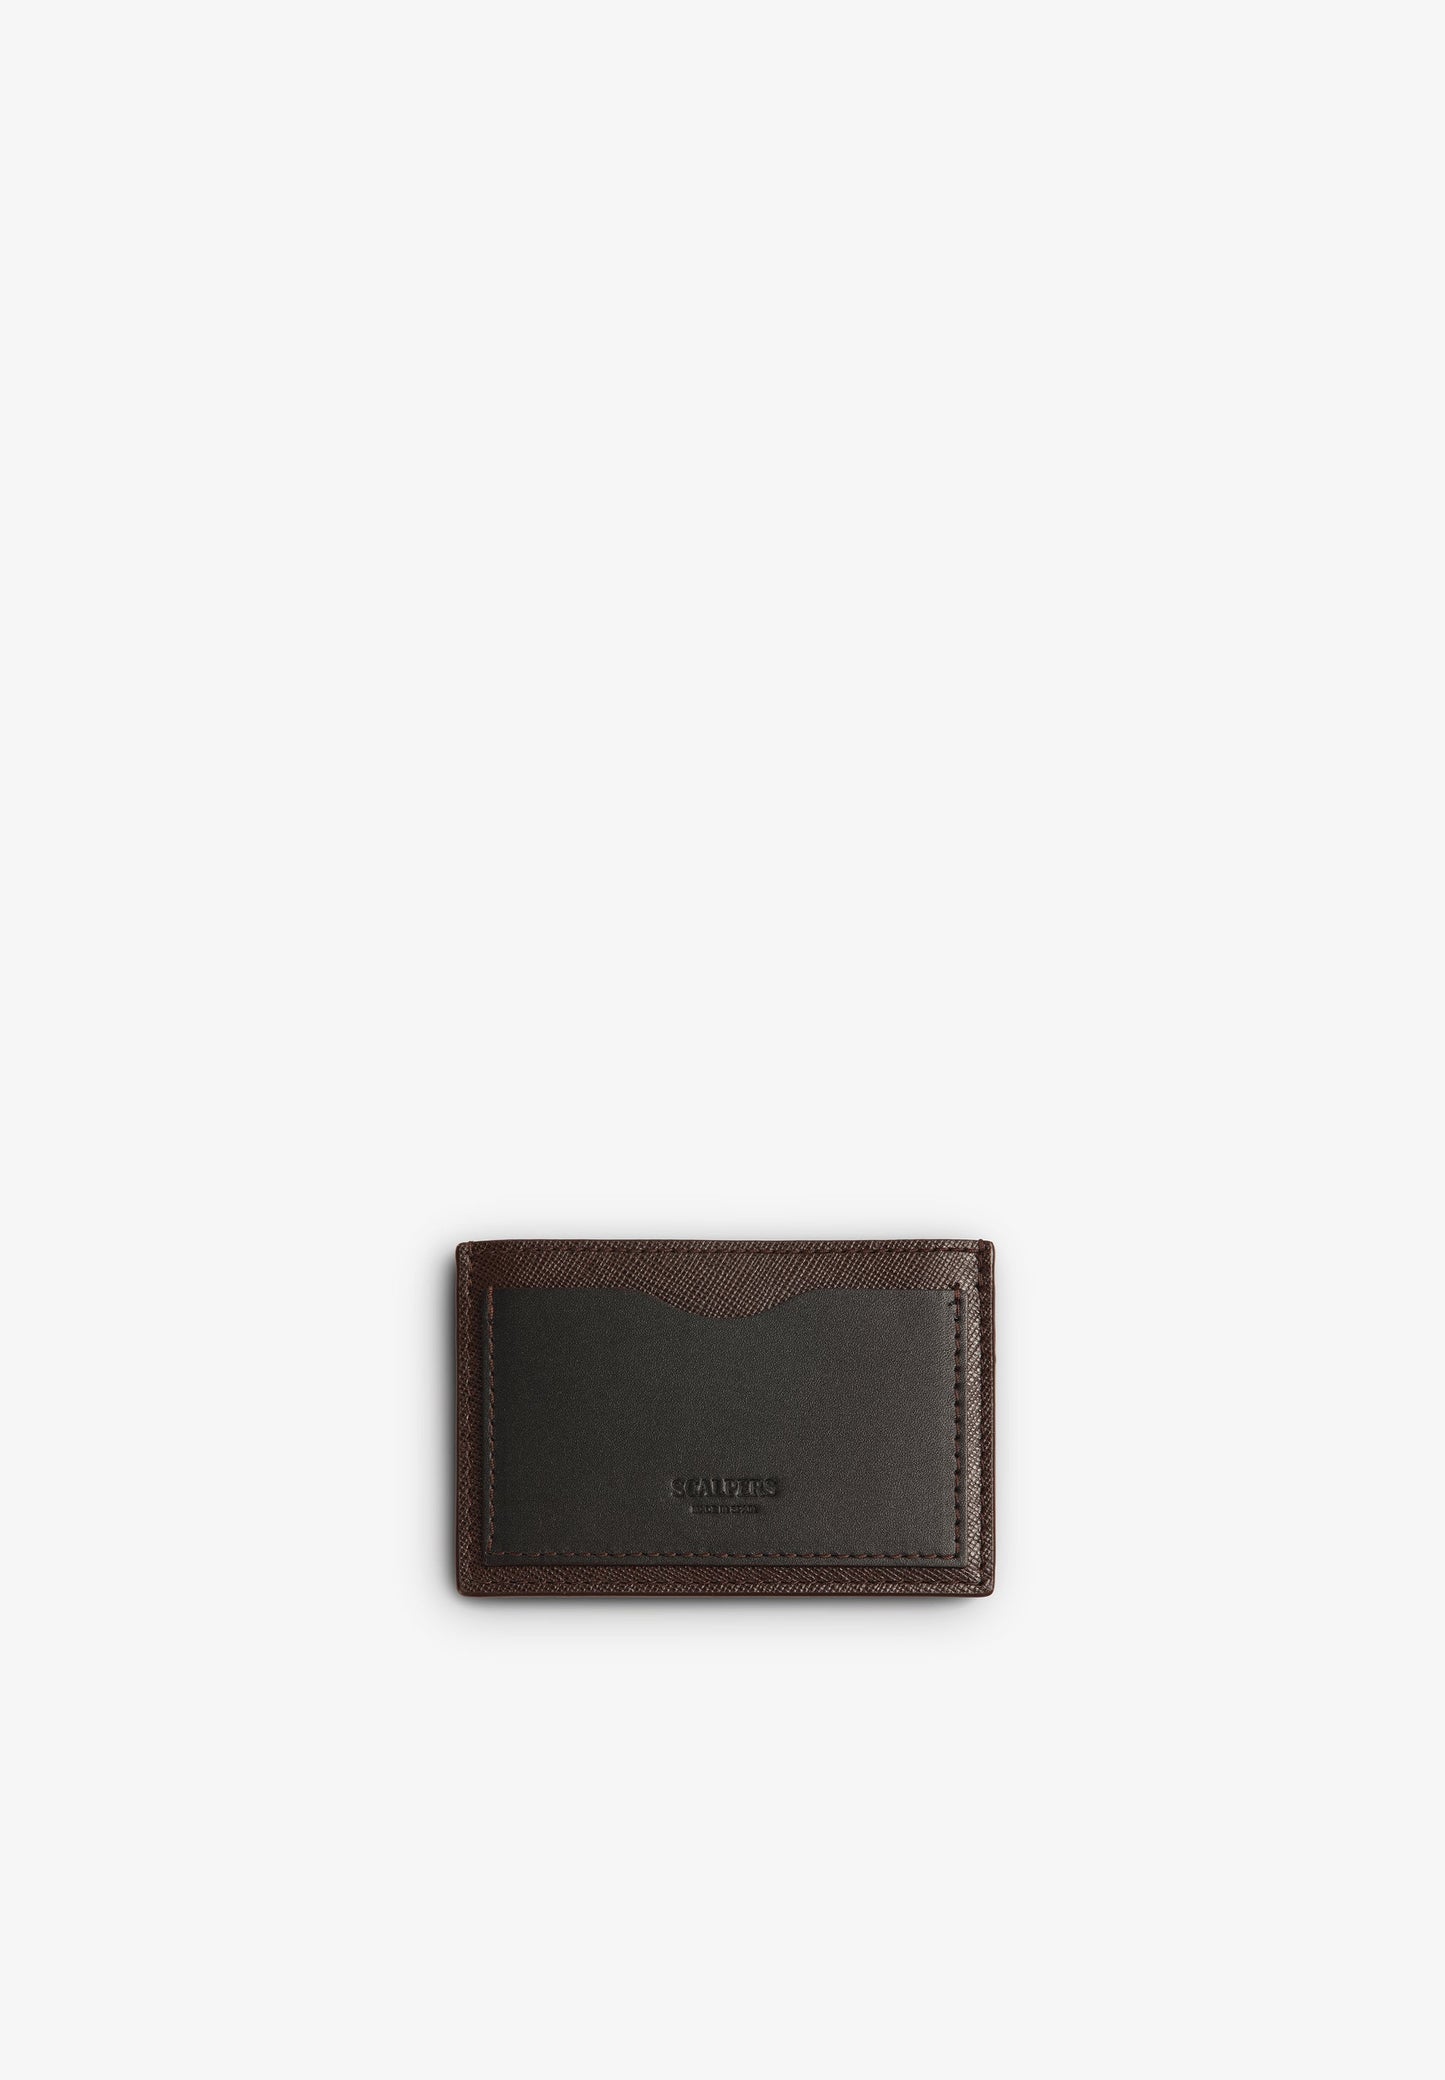 LEATHER CARD HOLDER WITH CONTRAST DETAIL